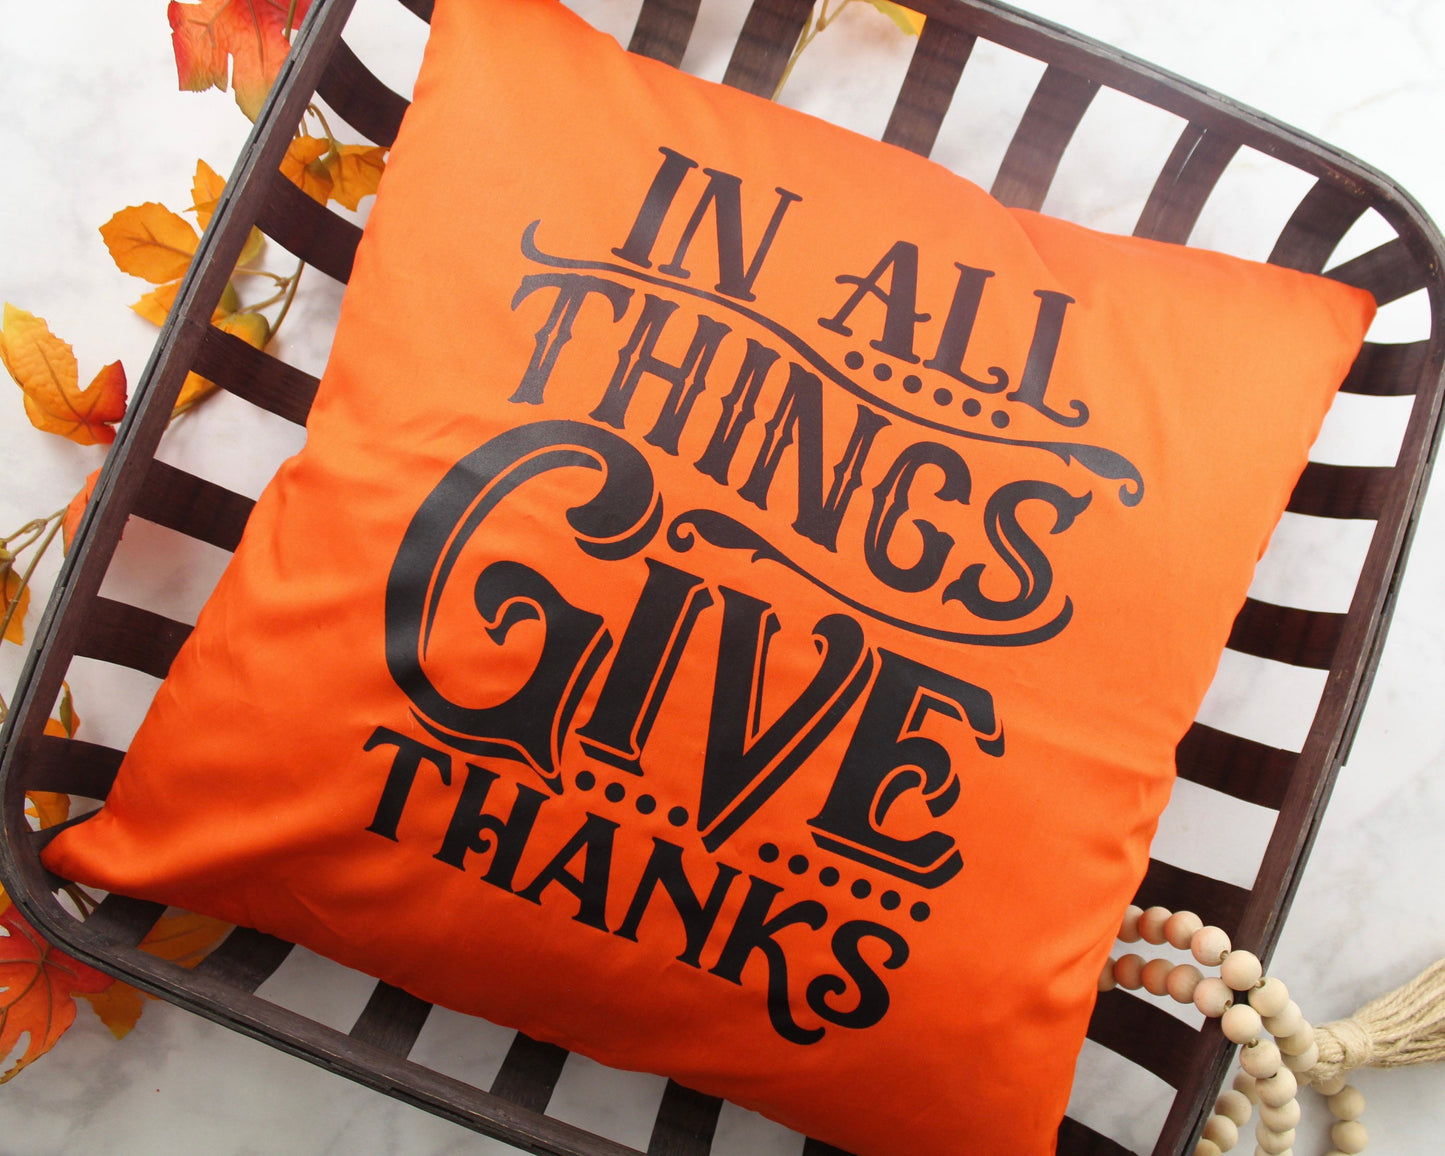 In All Things Give Thanks Throw Pillow - Orange